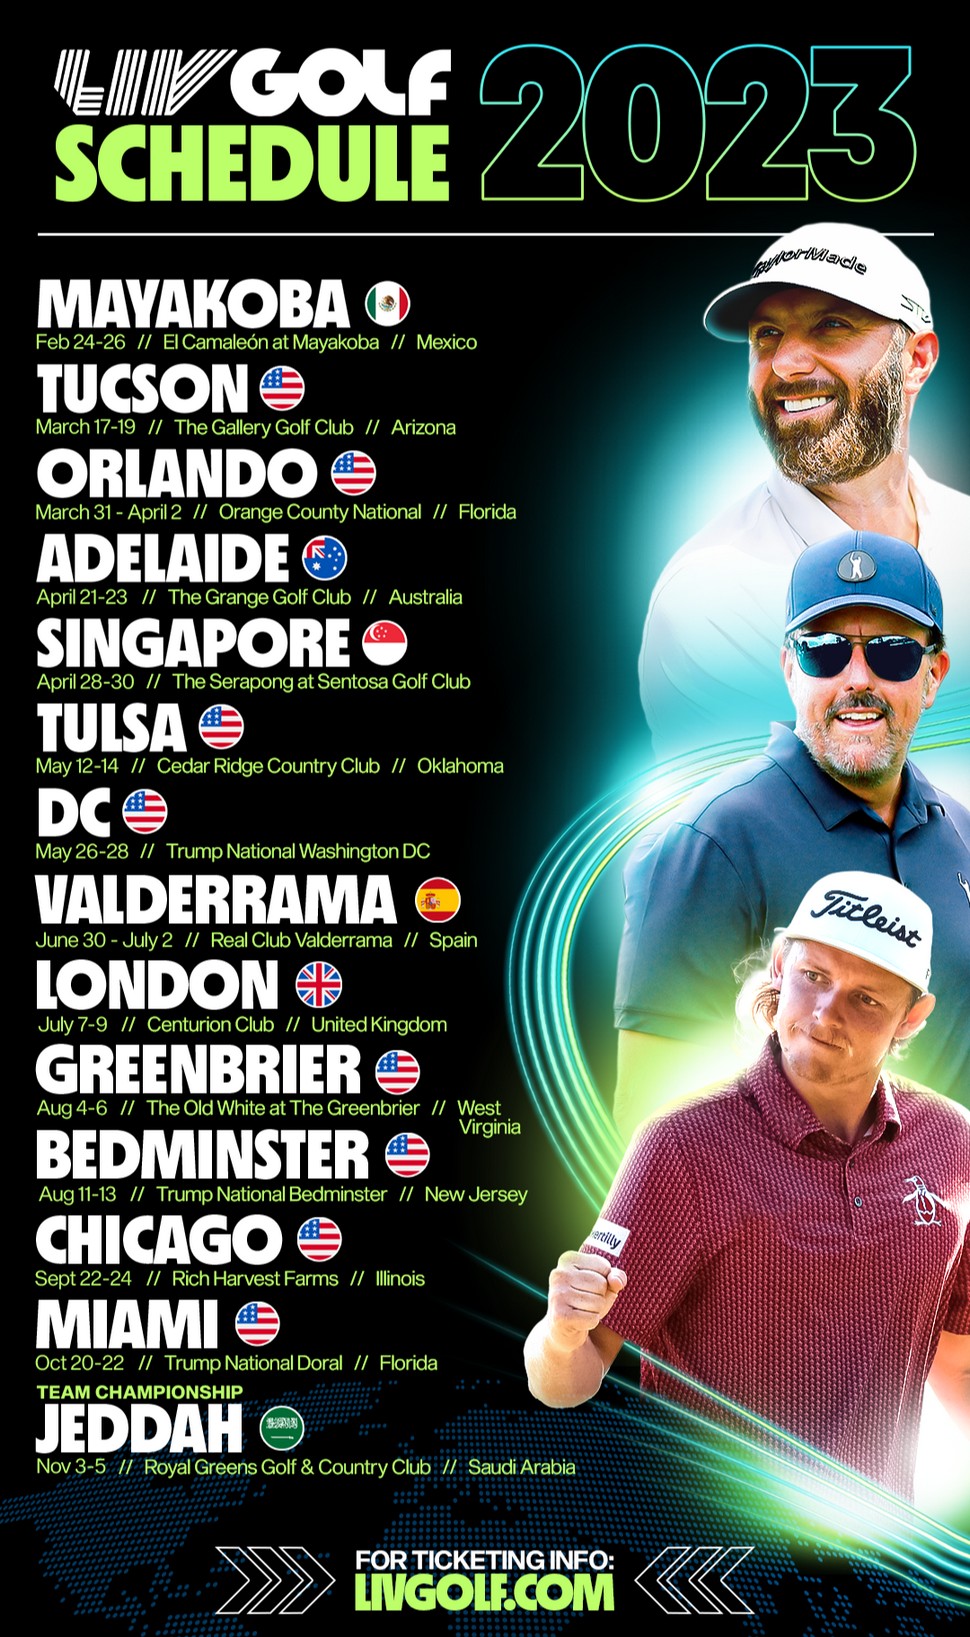 LIV Golf league's 2023 schedule to feature 14 events in seven countries